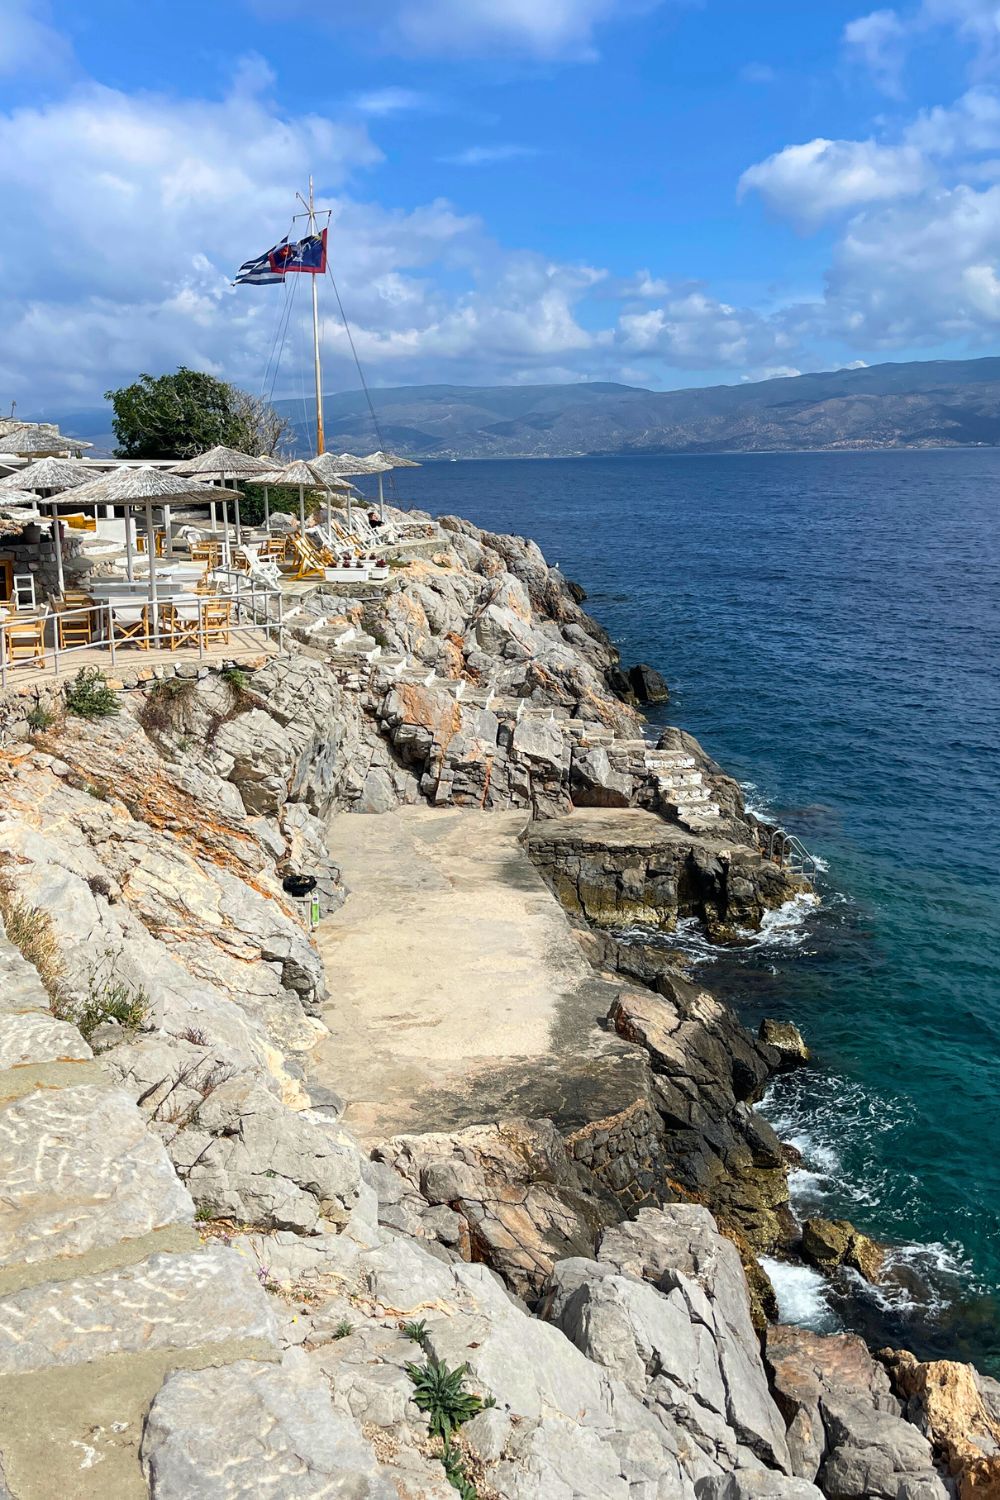 Seaside leisure at its best in Hydra, with a rocky beach adorned with straw umbrellas and wooden loungers overlooking the azure sea and distant mountains.